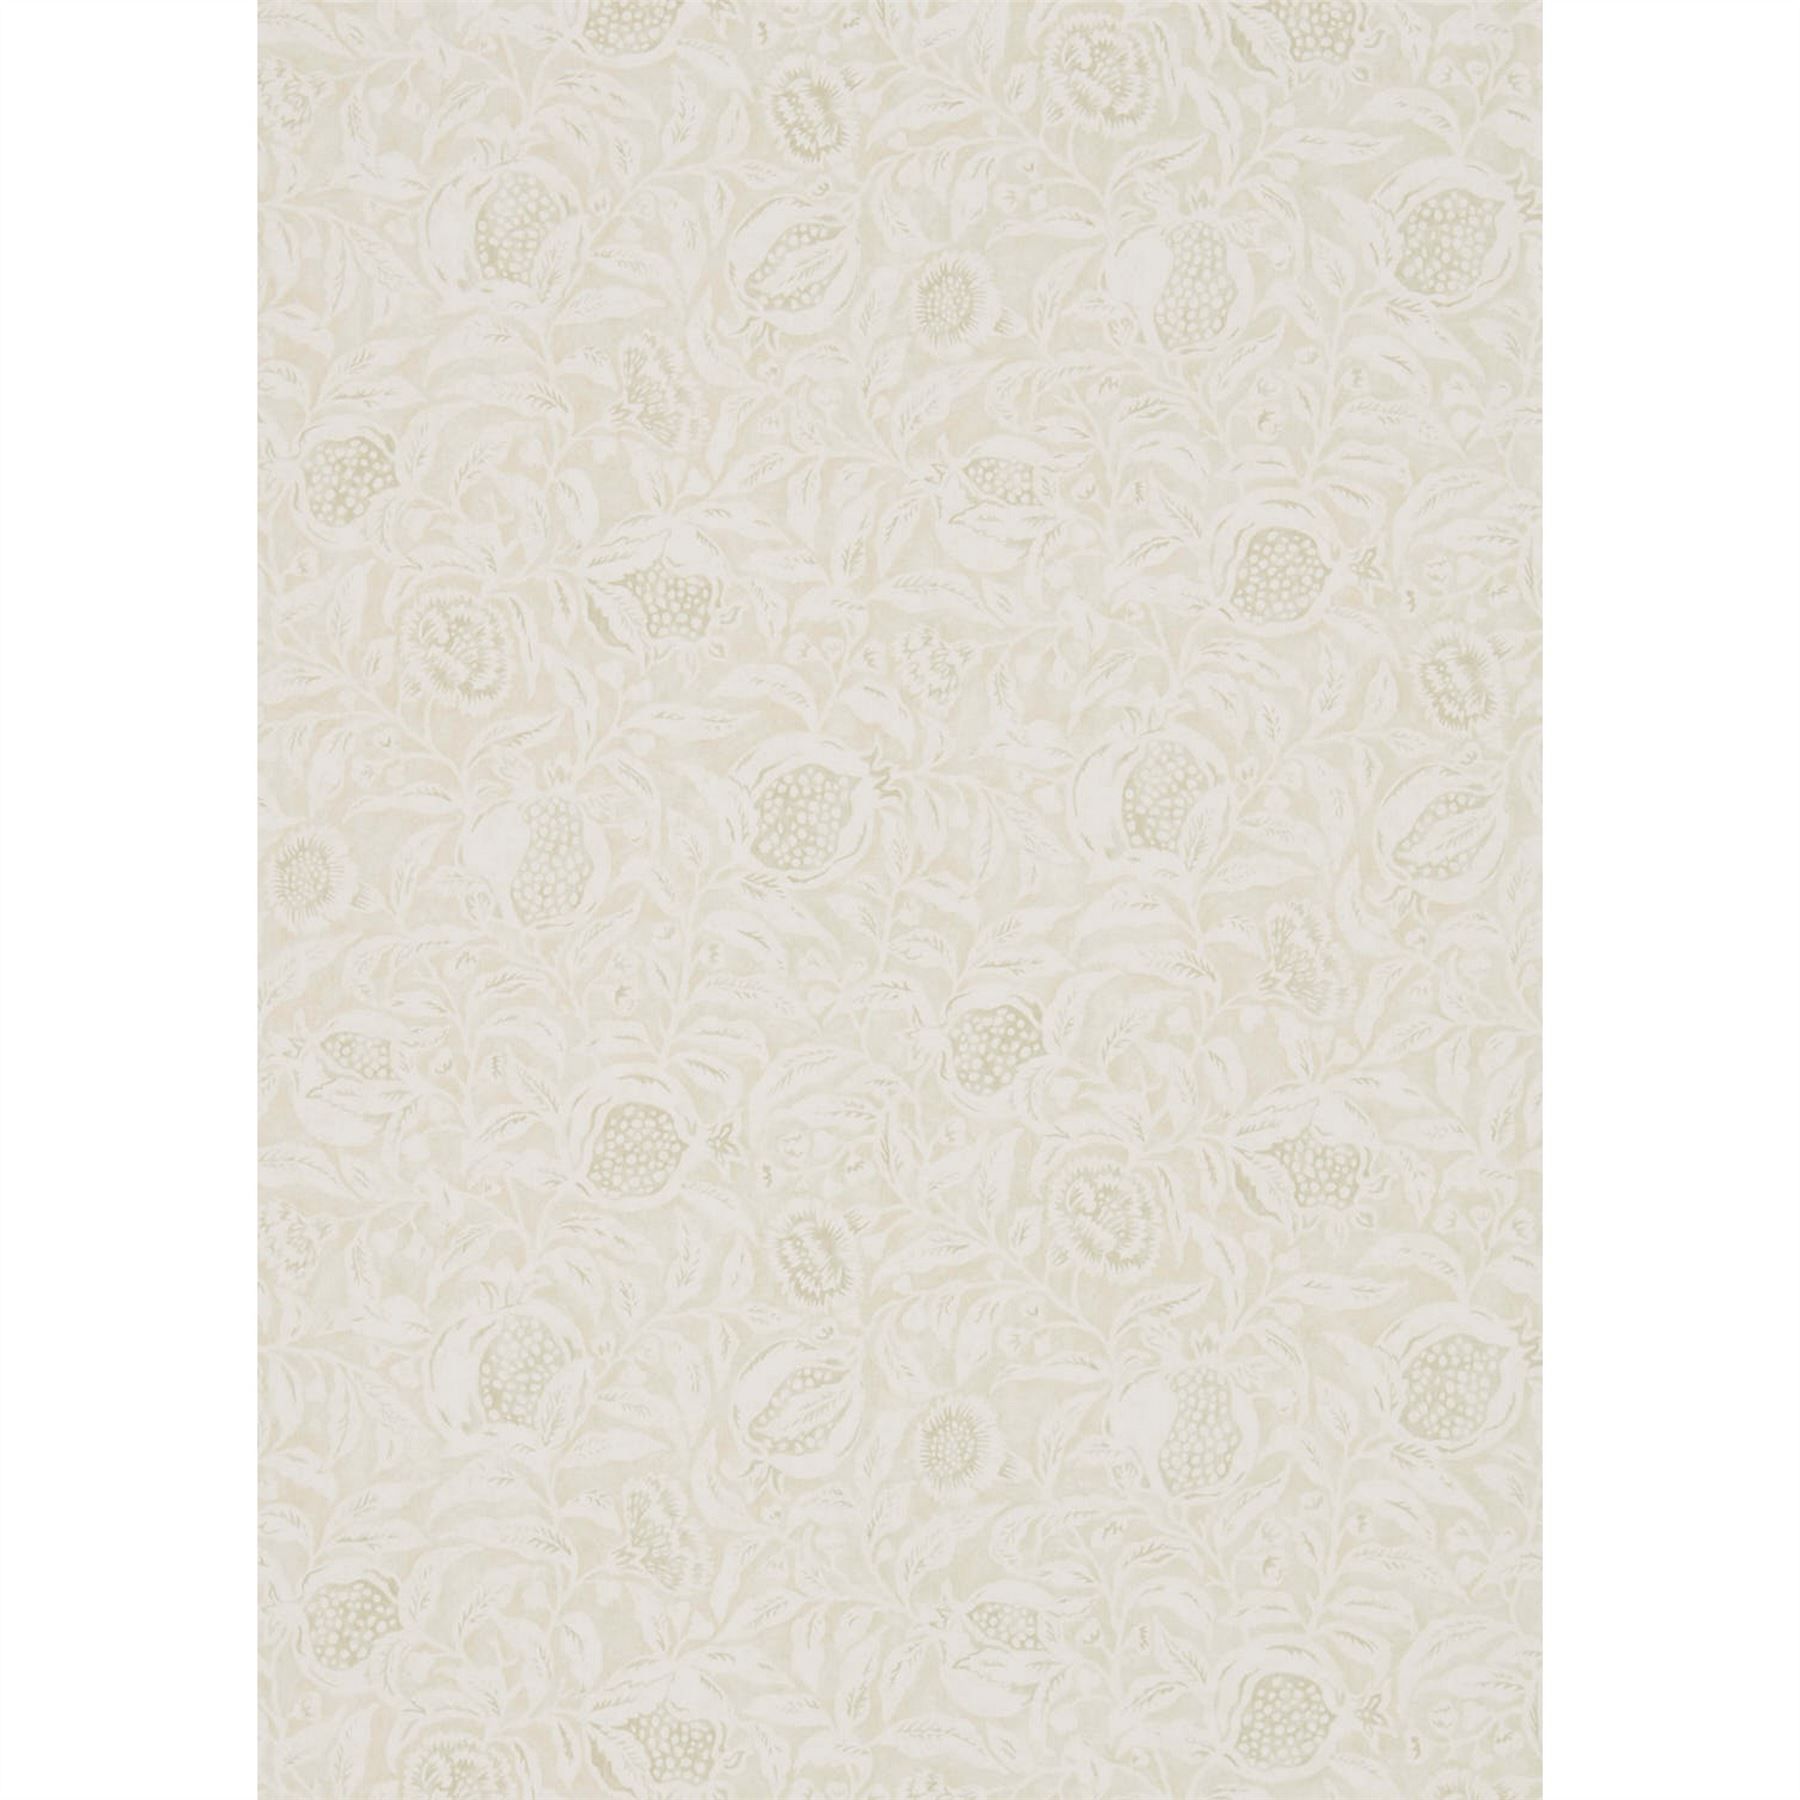 Handcrafted Silhouetted Flower Foliage Ivory Stone Wallpaper | Sanderson  Annandale